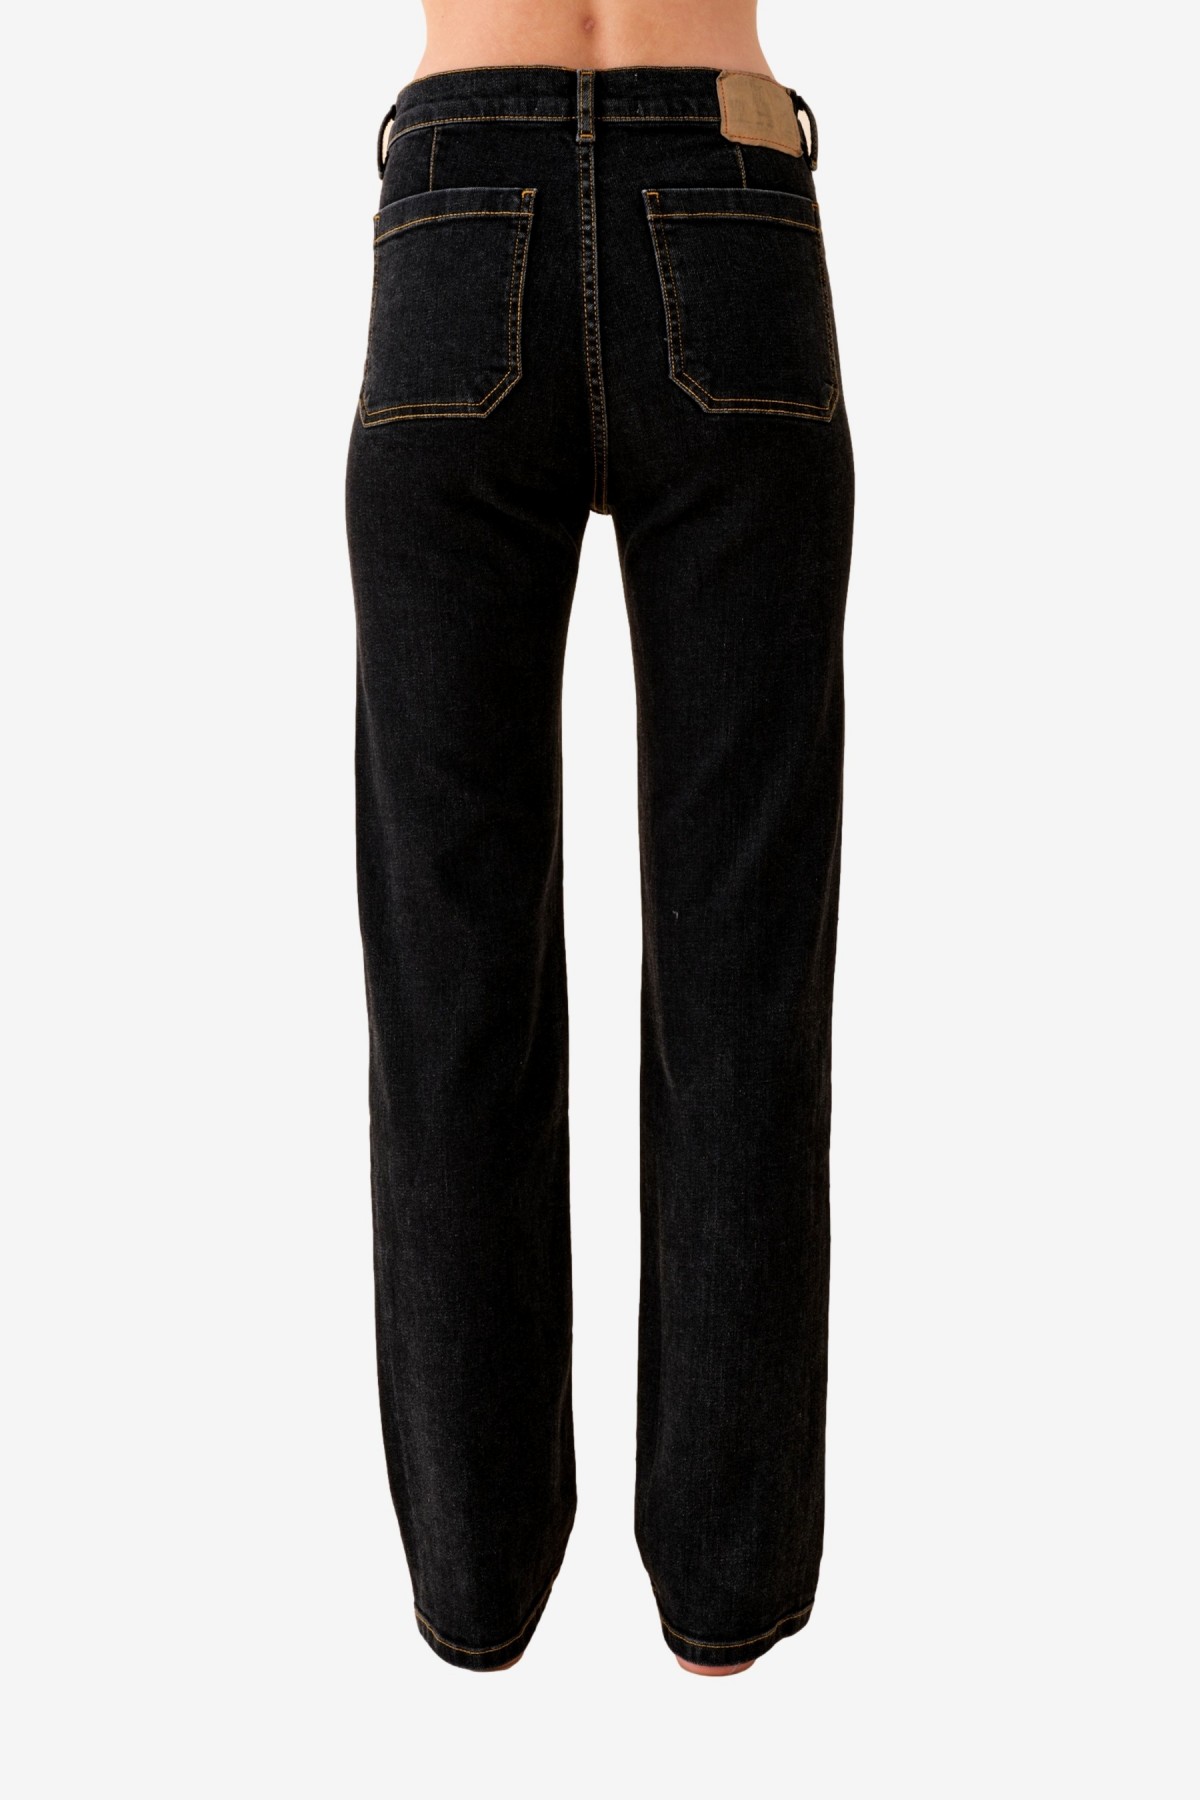 Jeanerica AW014 Alta Jeans in Black 8 Weeks